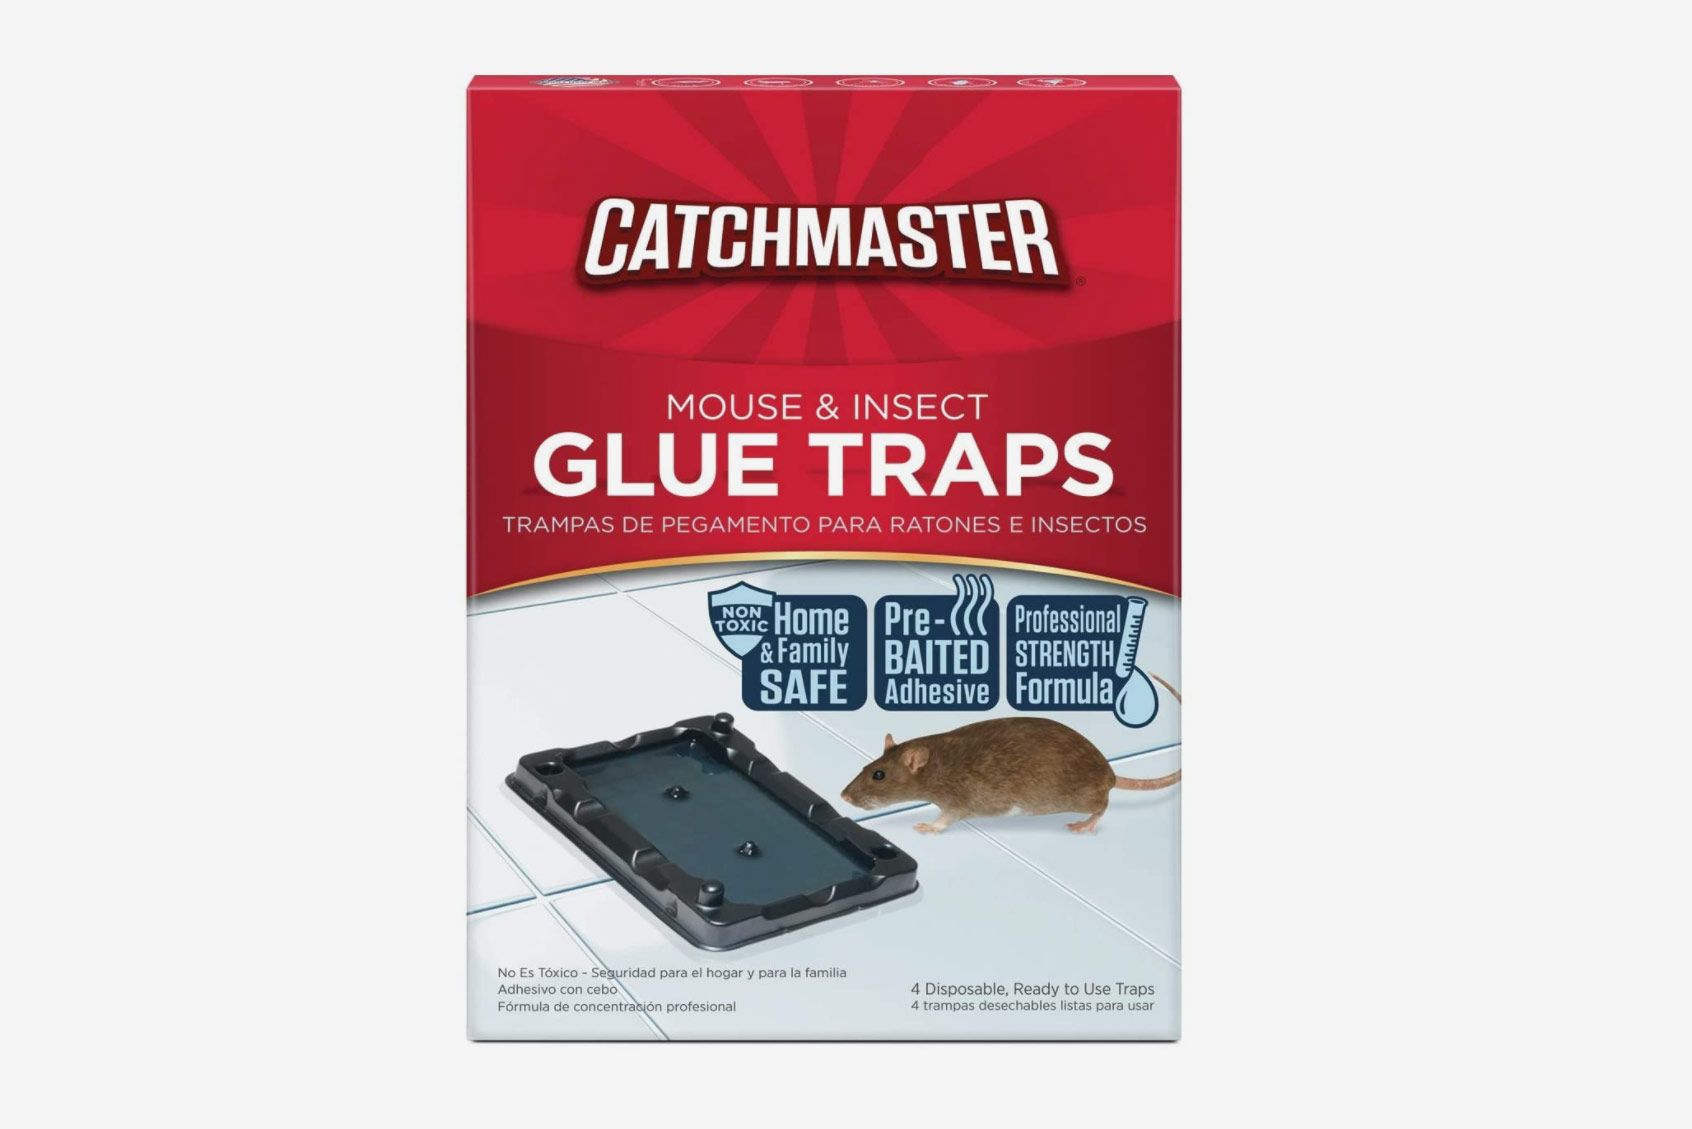 Trap That Effectively Kills a Mouse